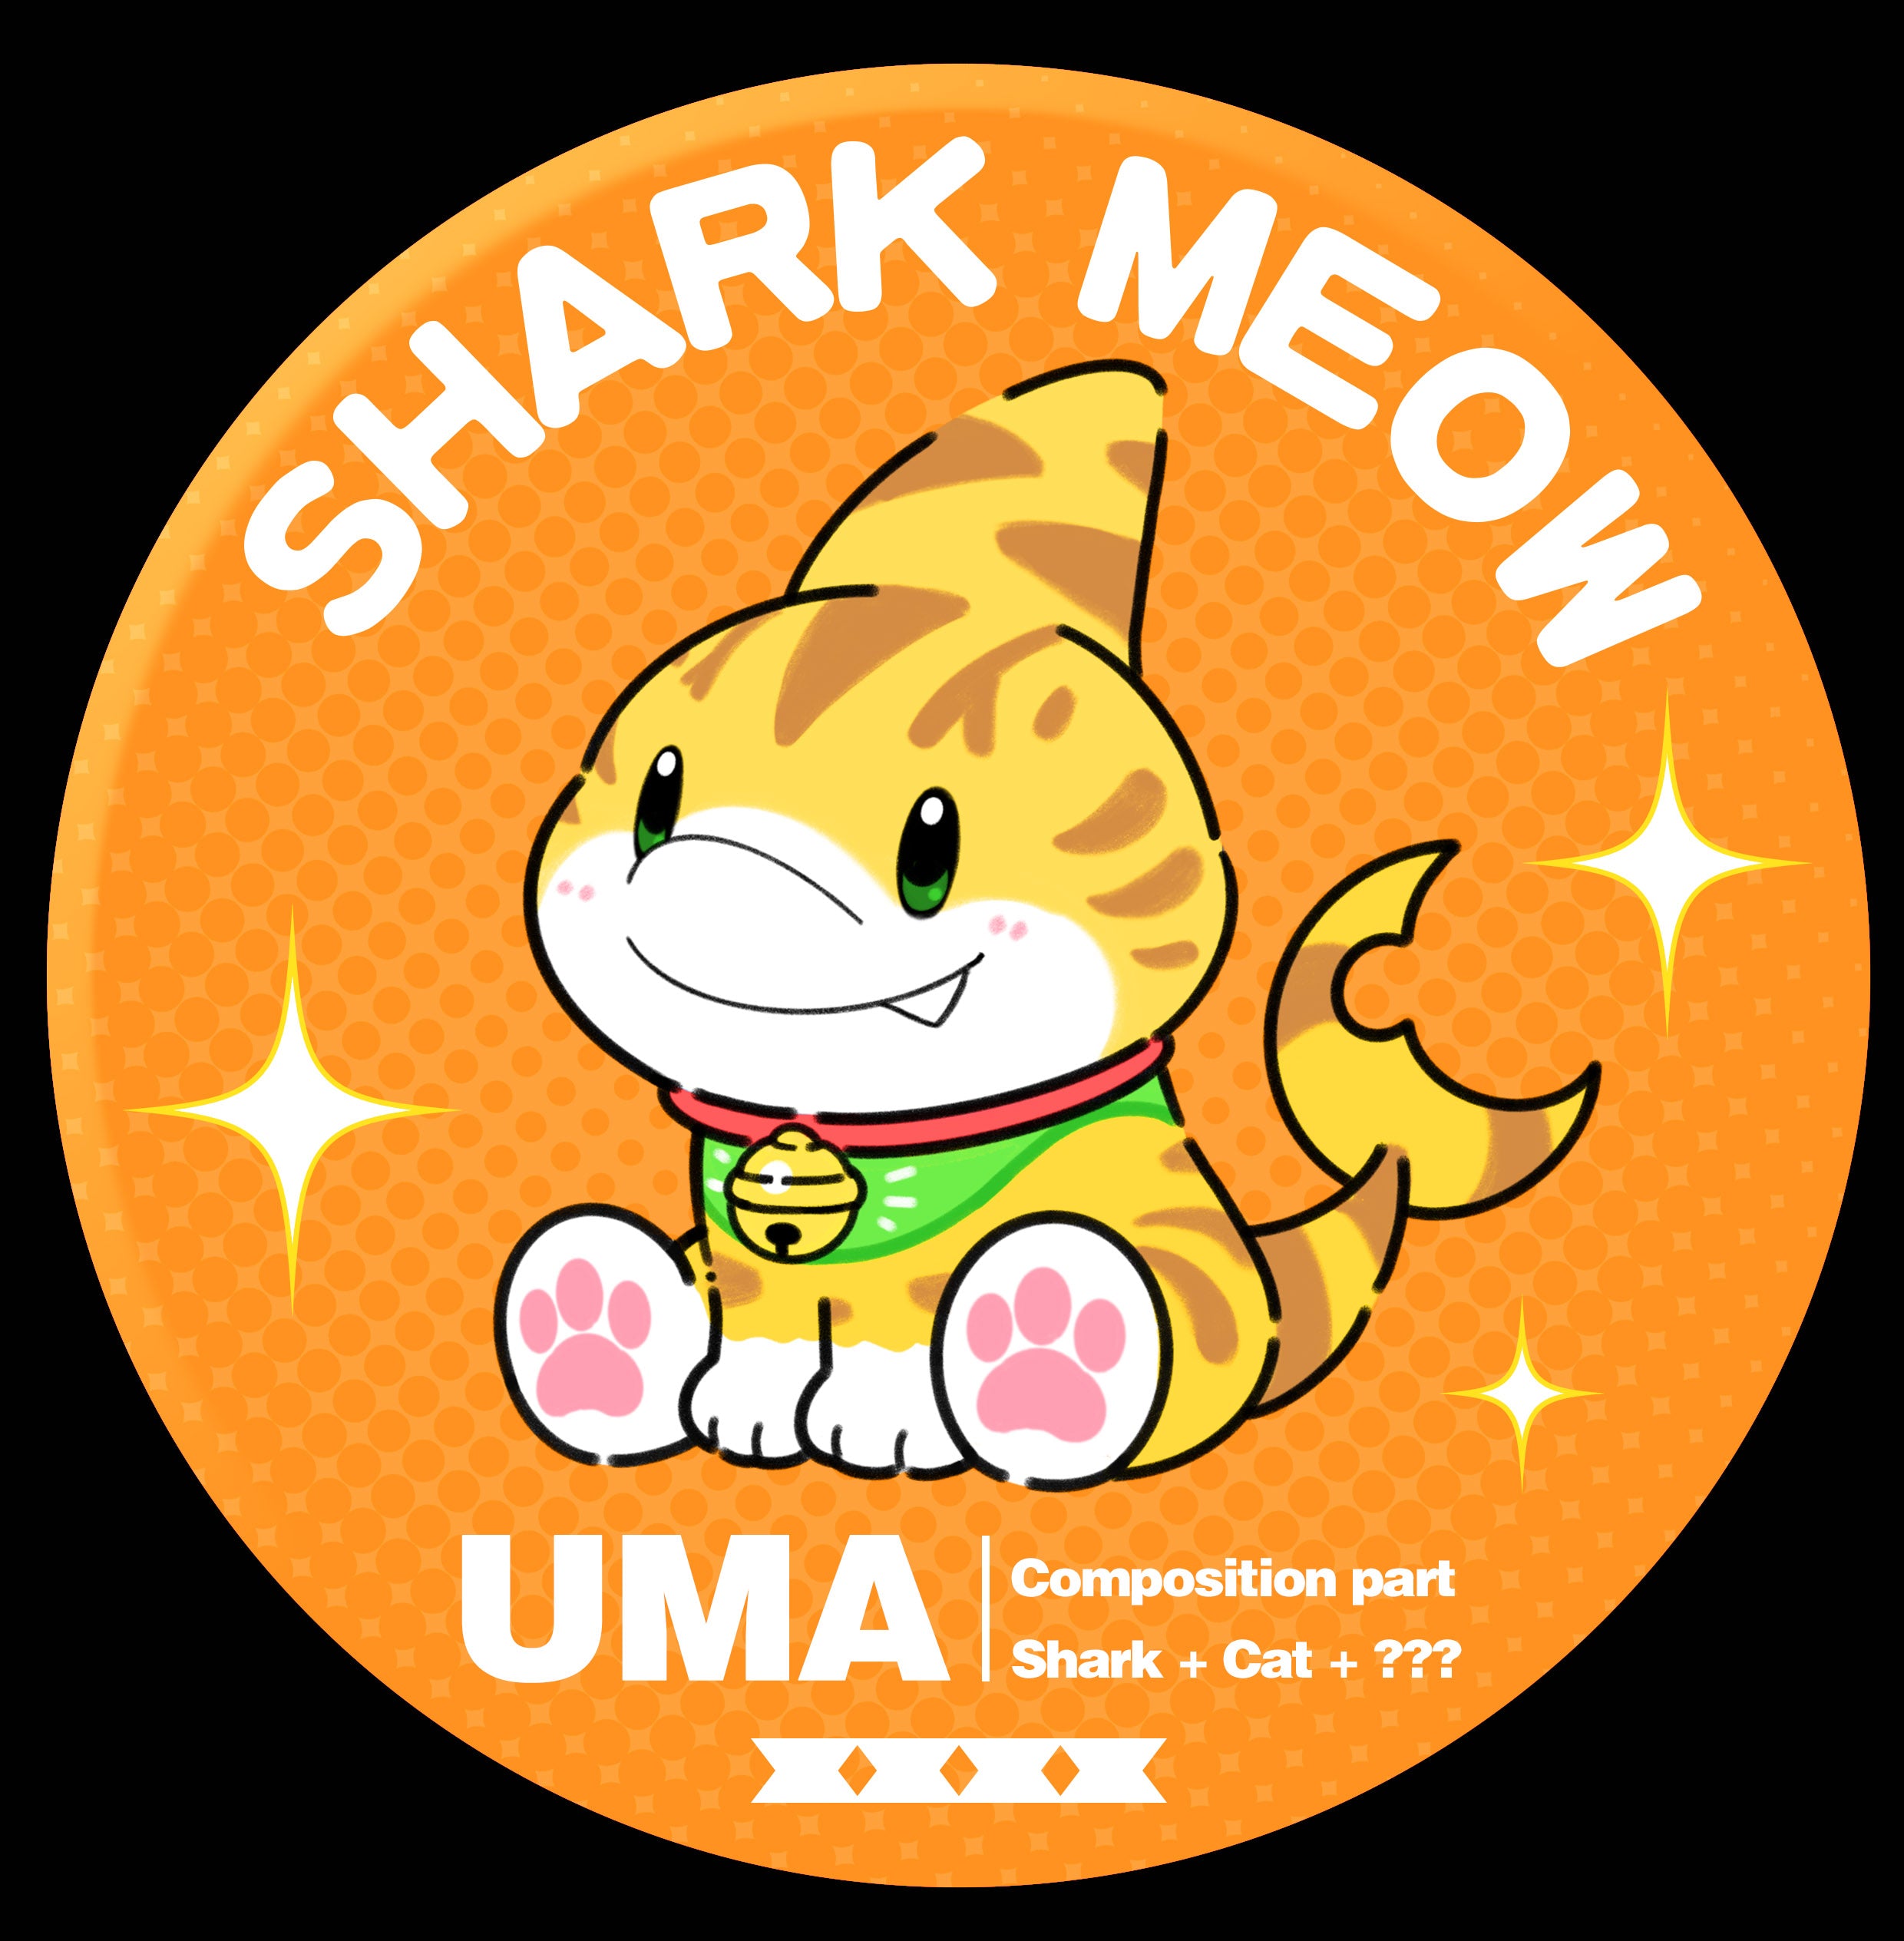 Shark Meow - Fortune Cat by Maosoul